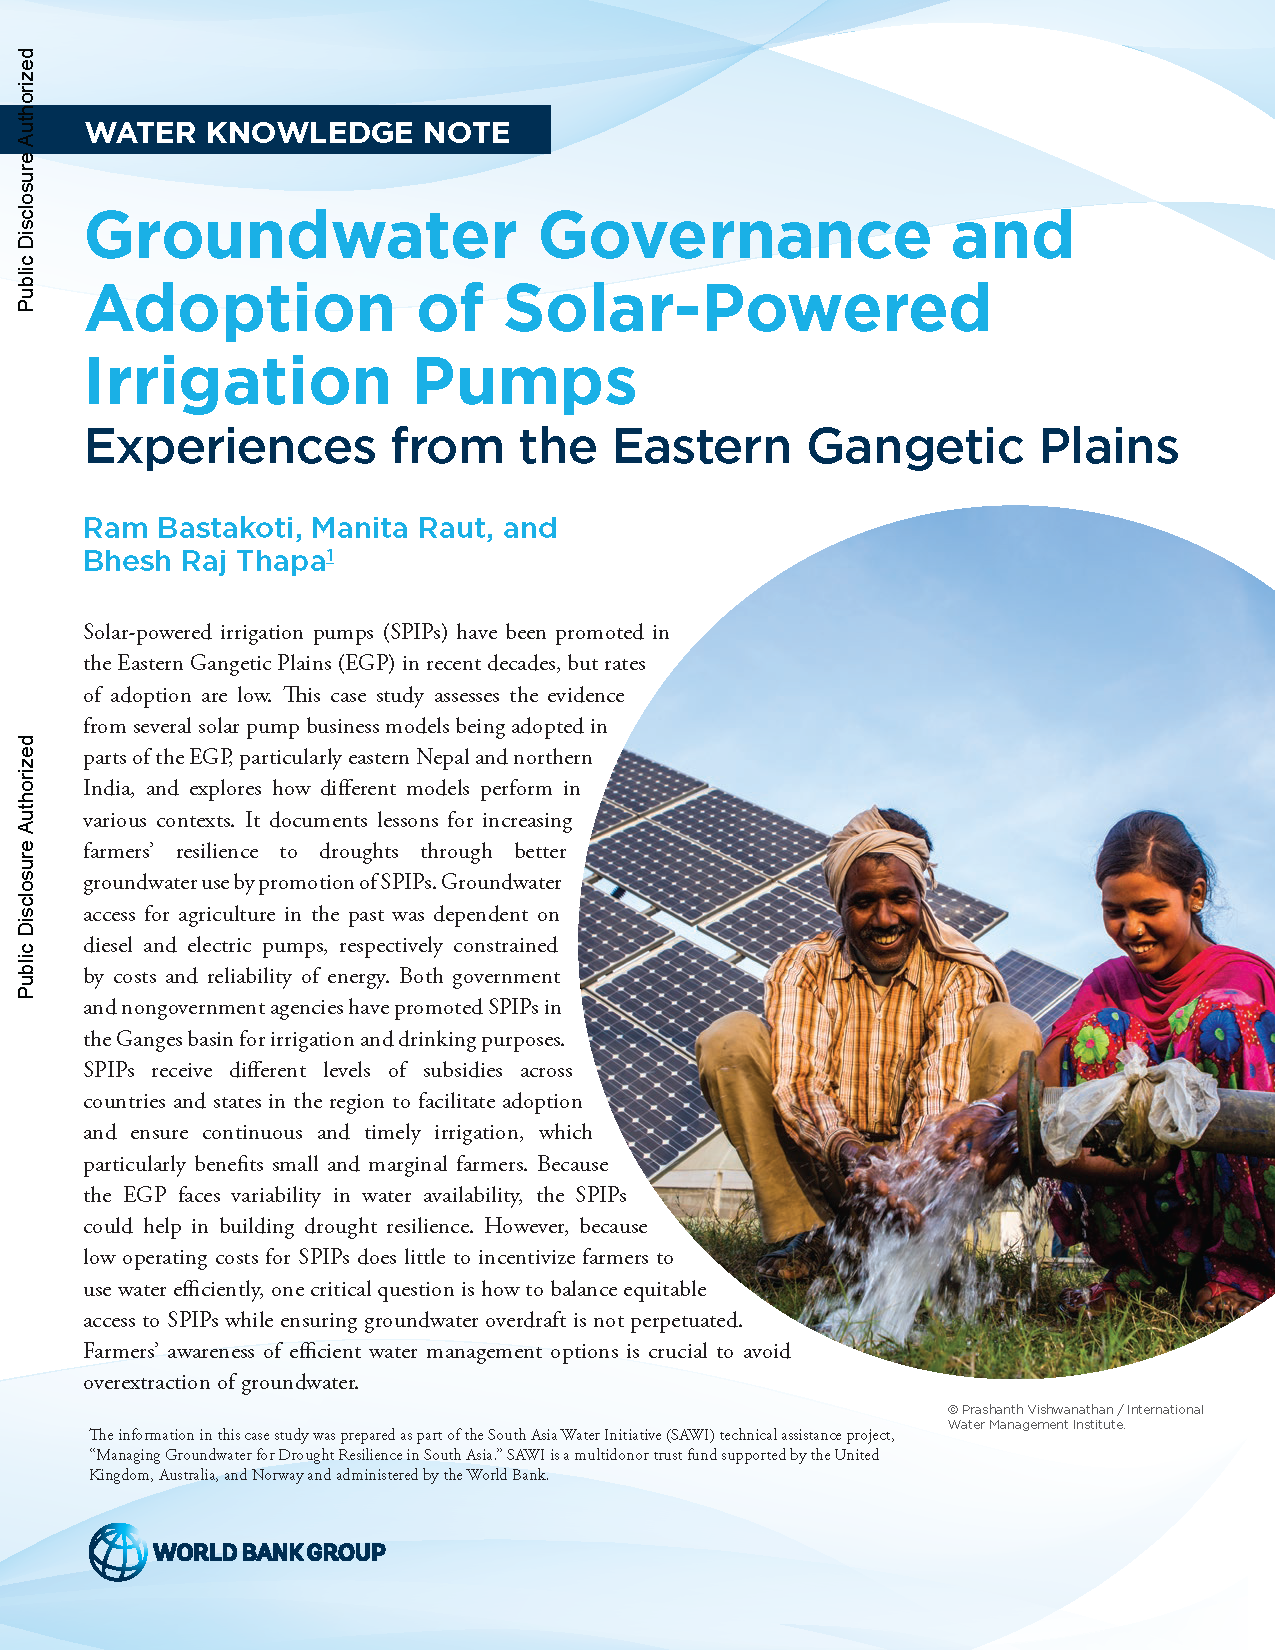 Cover-page for Groundwater Governance and Adoption of Solar-Powered Irrigation Pumps